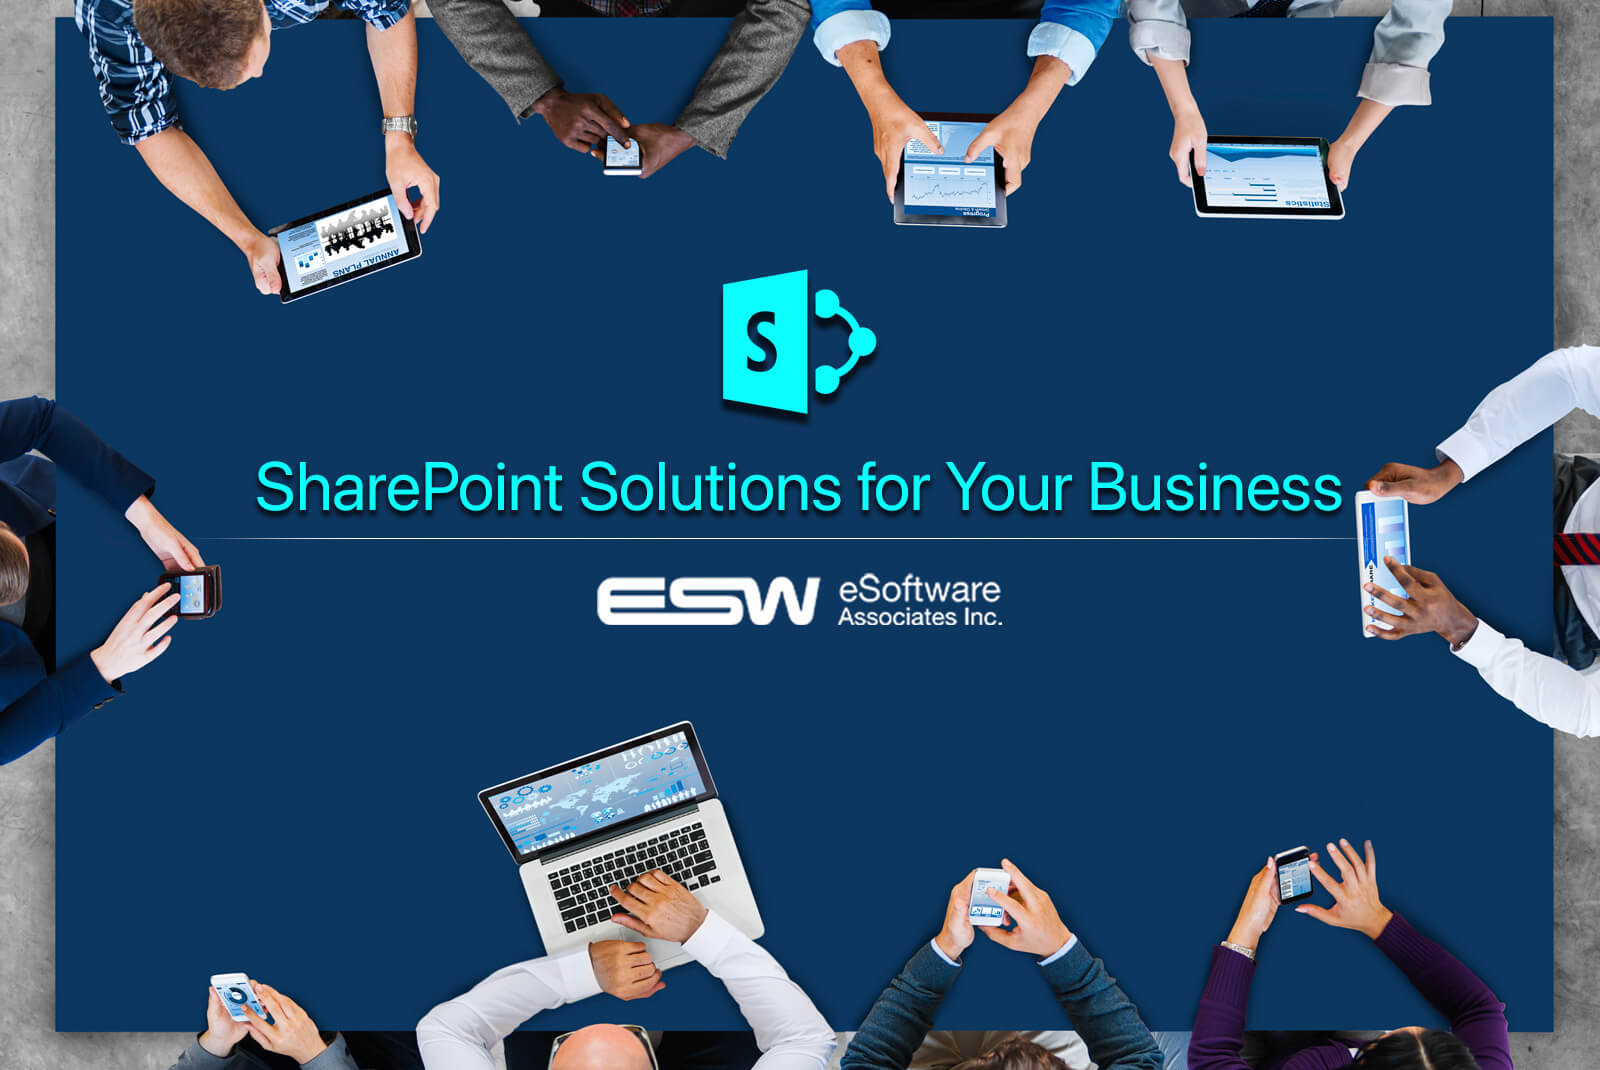 SharePoint Solutions for Your Business by ESWCompany